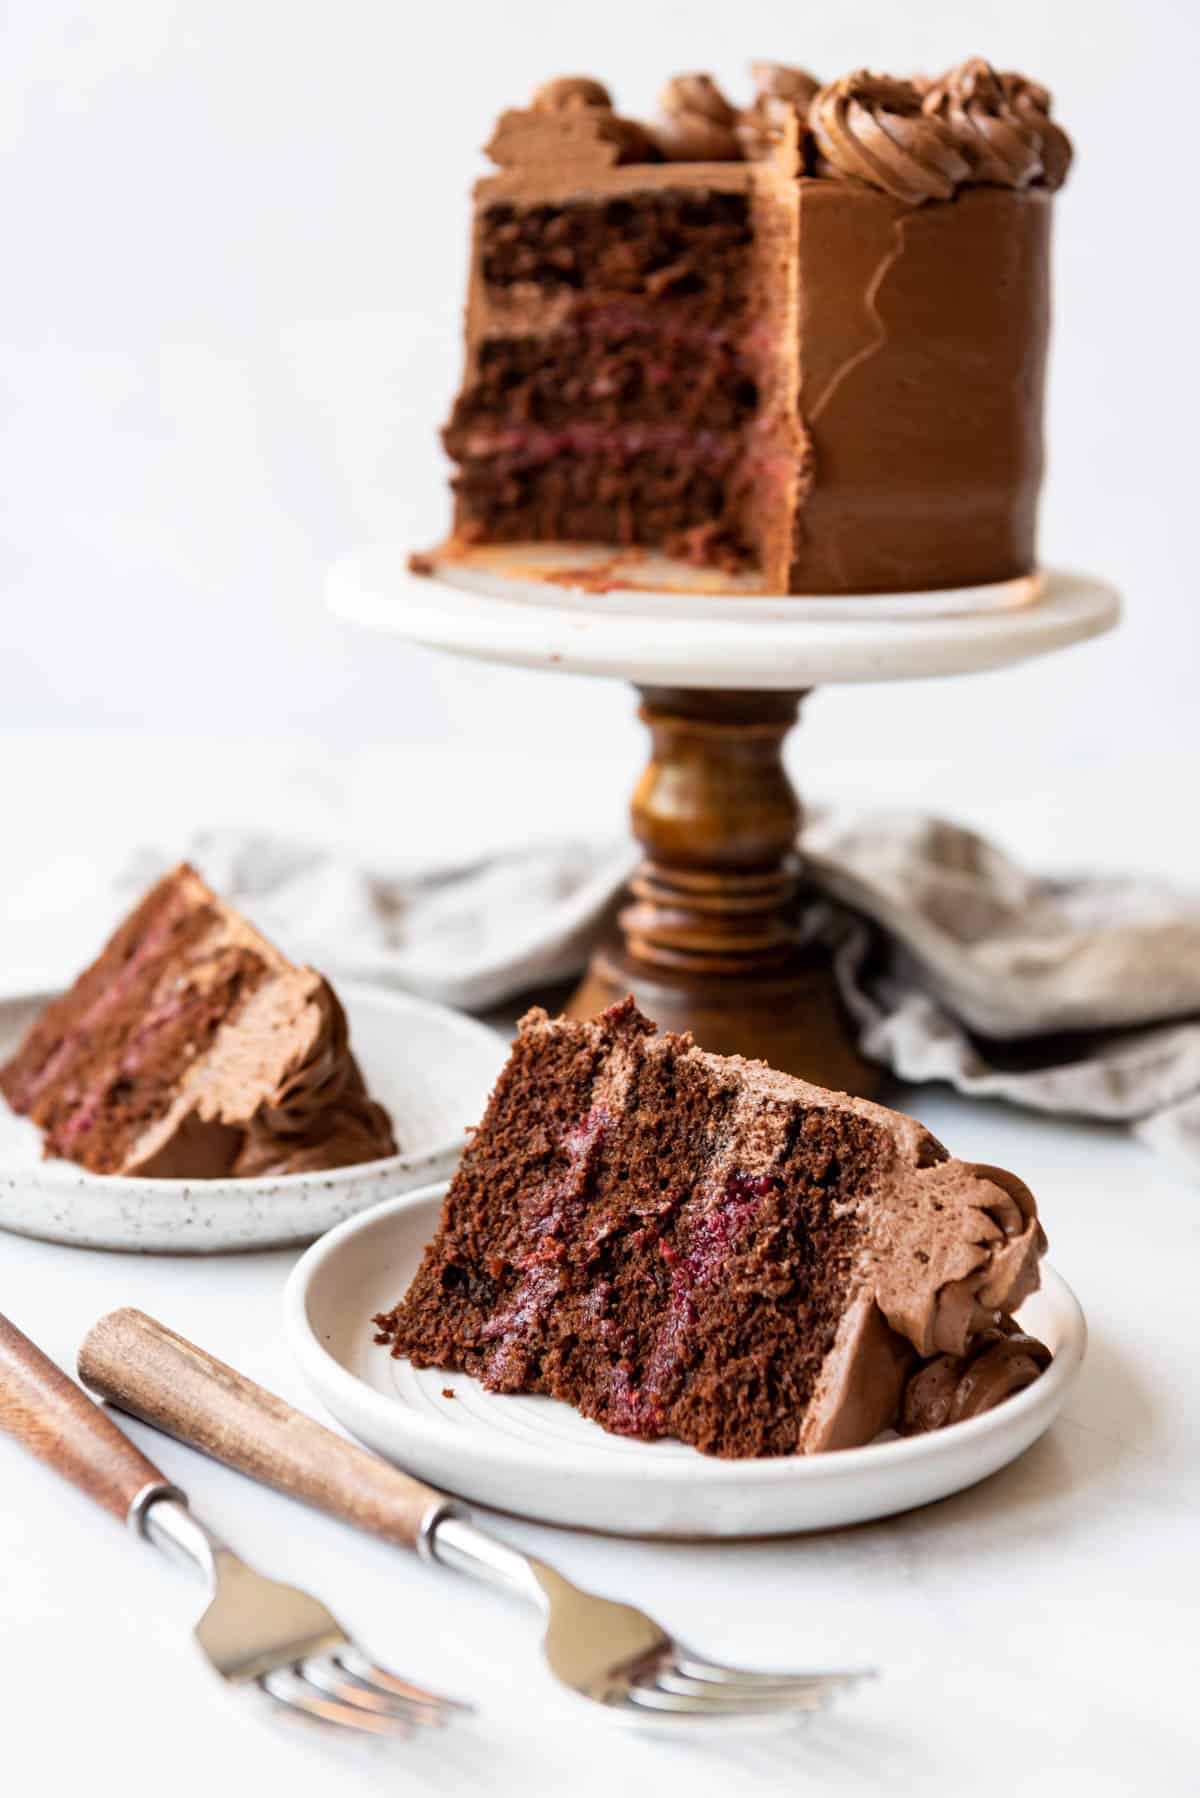 Slices of chocolate raspberry cake on plates in front of the rest of the cake on a cake stand.